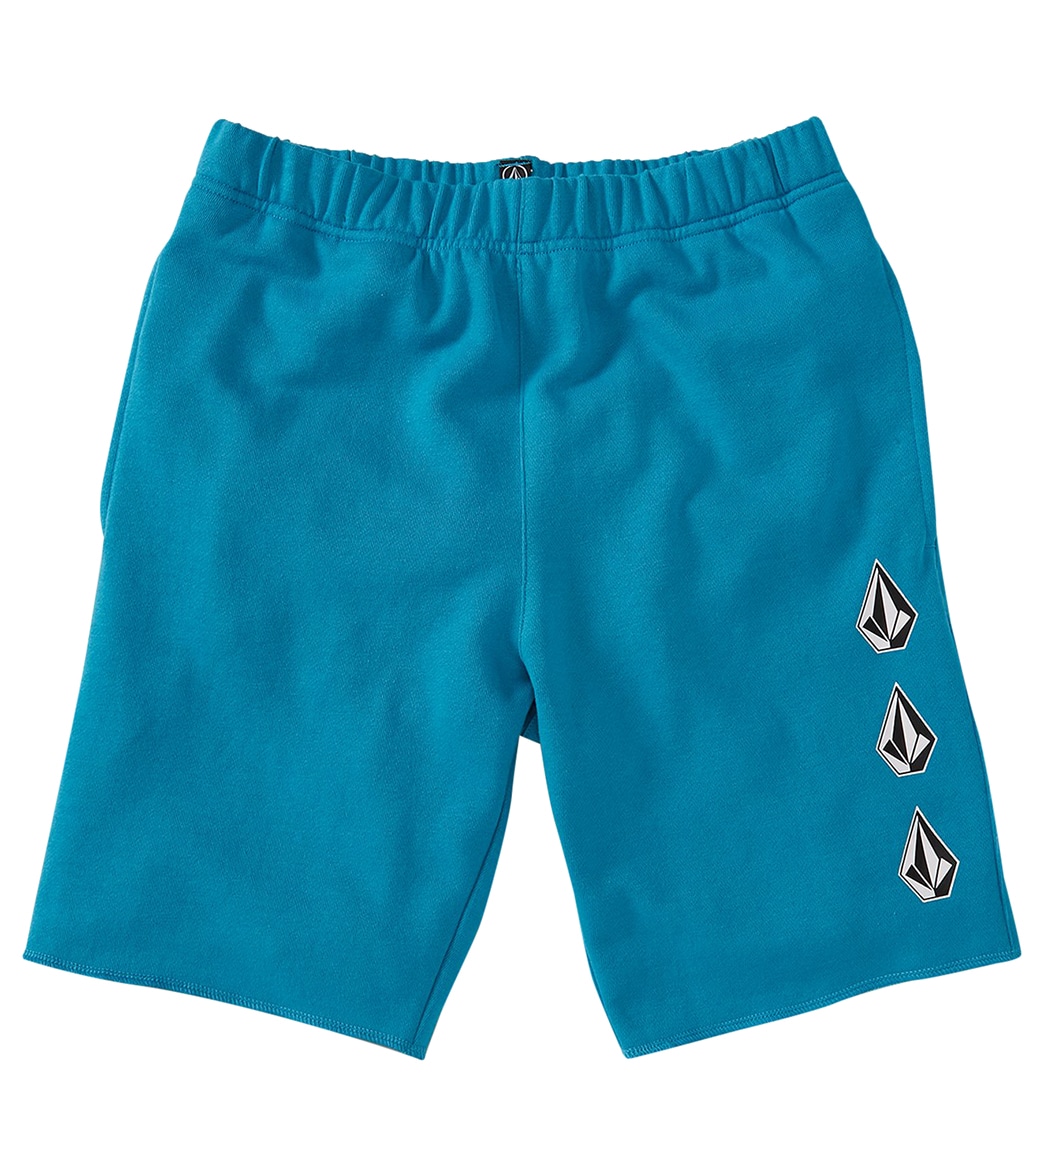 Volcom Boys' Iconic Stone Fleece Short - Barrier Reef Large Cotton/Polyester - Swimoutlet.com